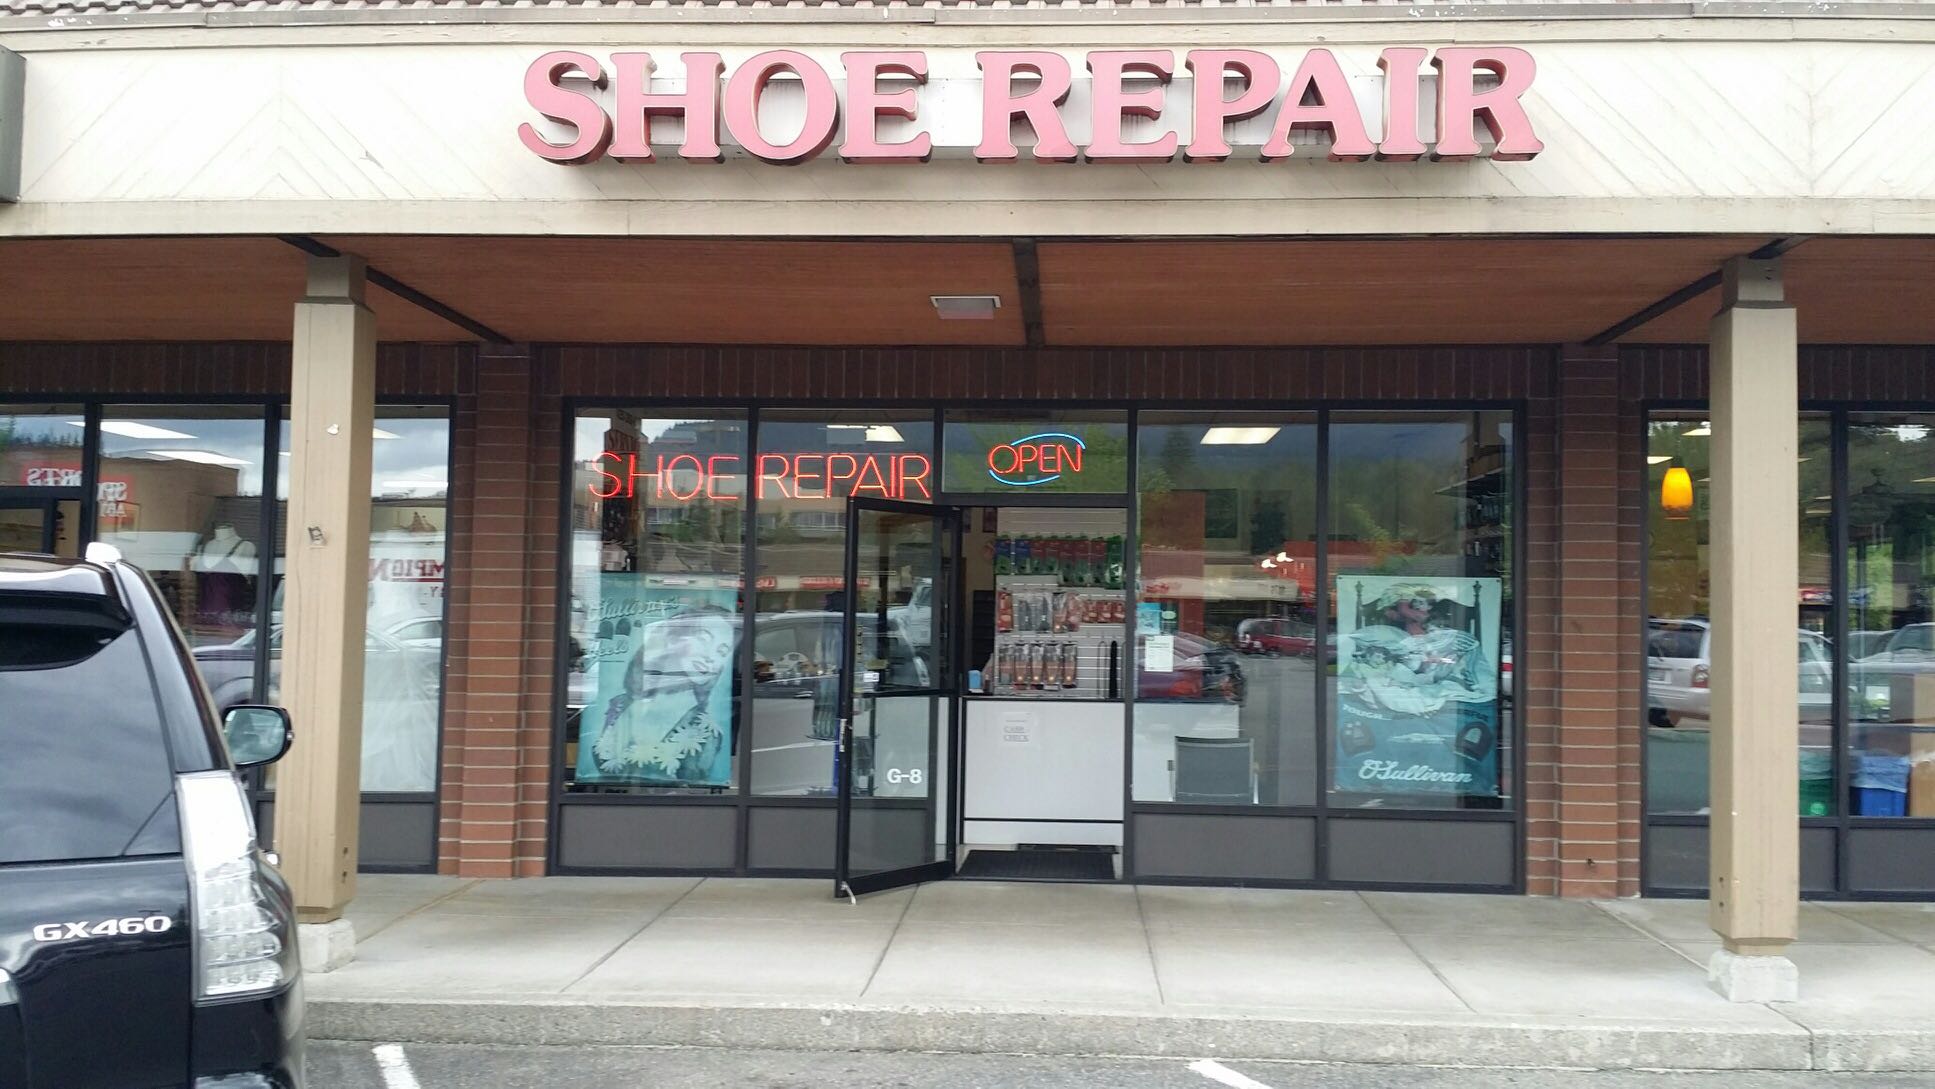 Andre's Shoe Services